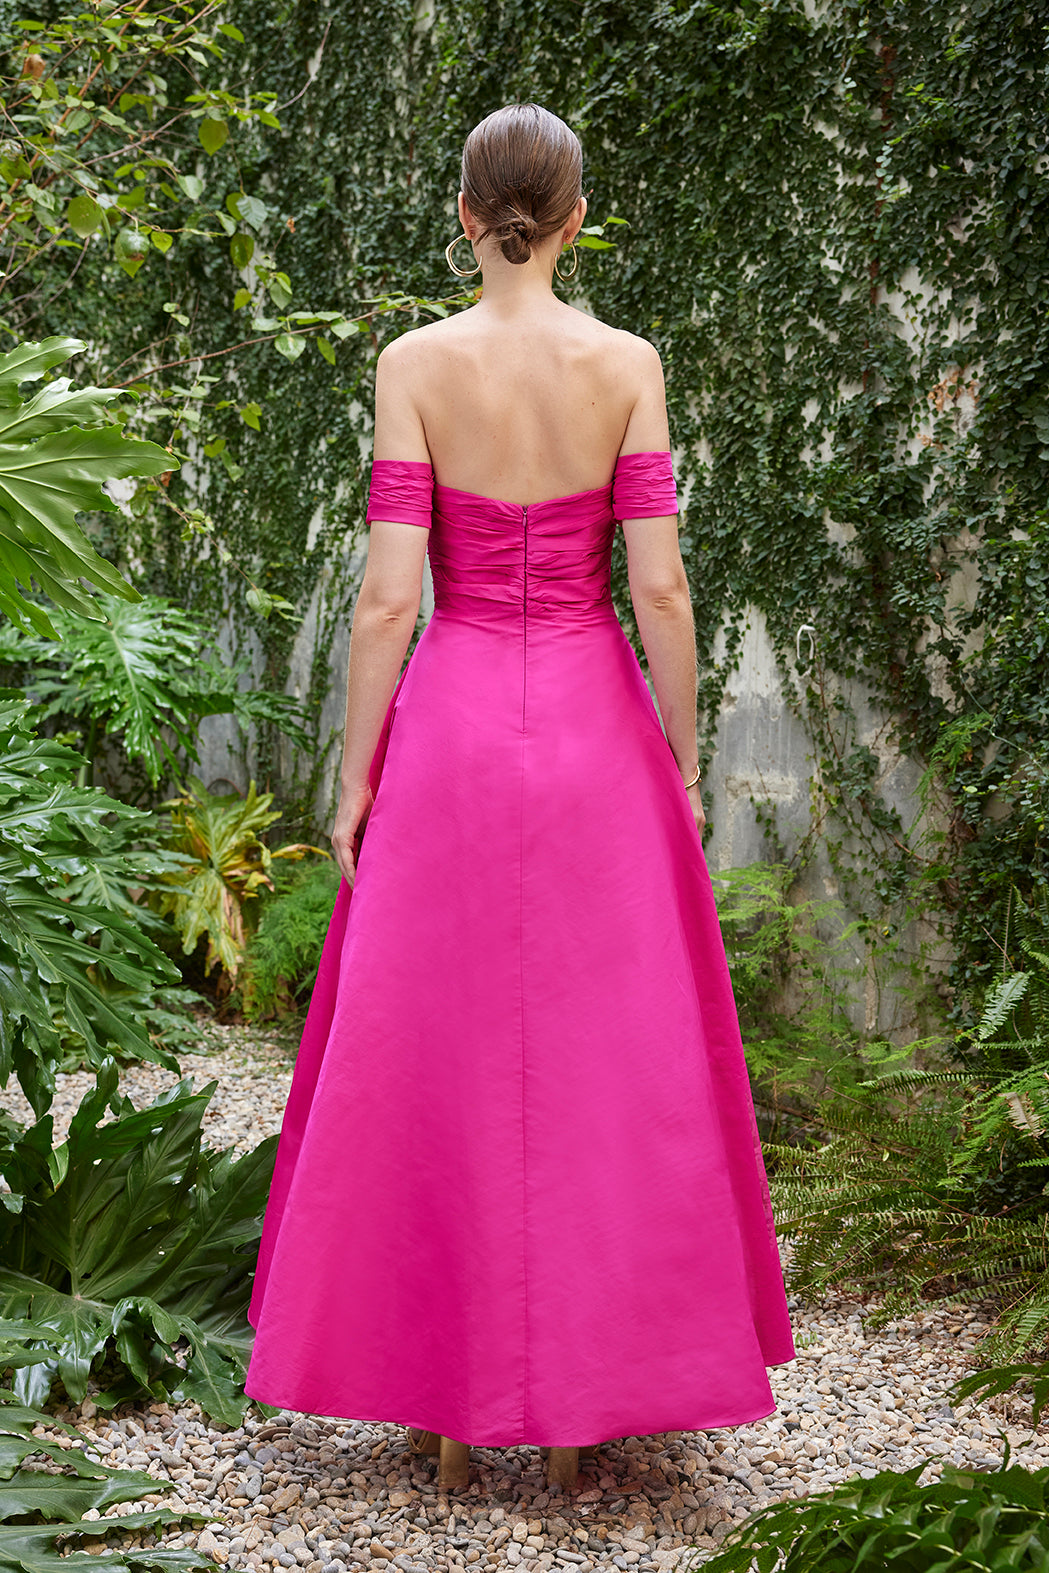 Back view of the fuchsia evening gown, also offered in red, showcasing the smooth zipper closure and off-the-shoulder sleeves against a garden wall draped with ivy.